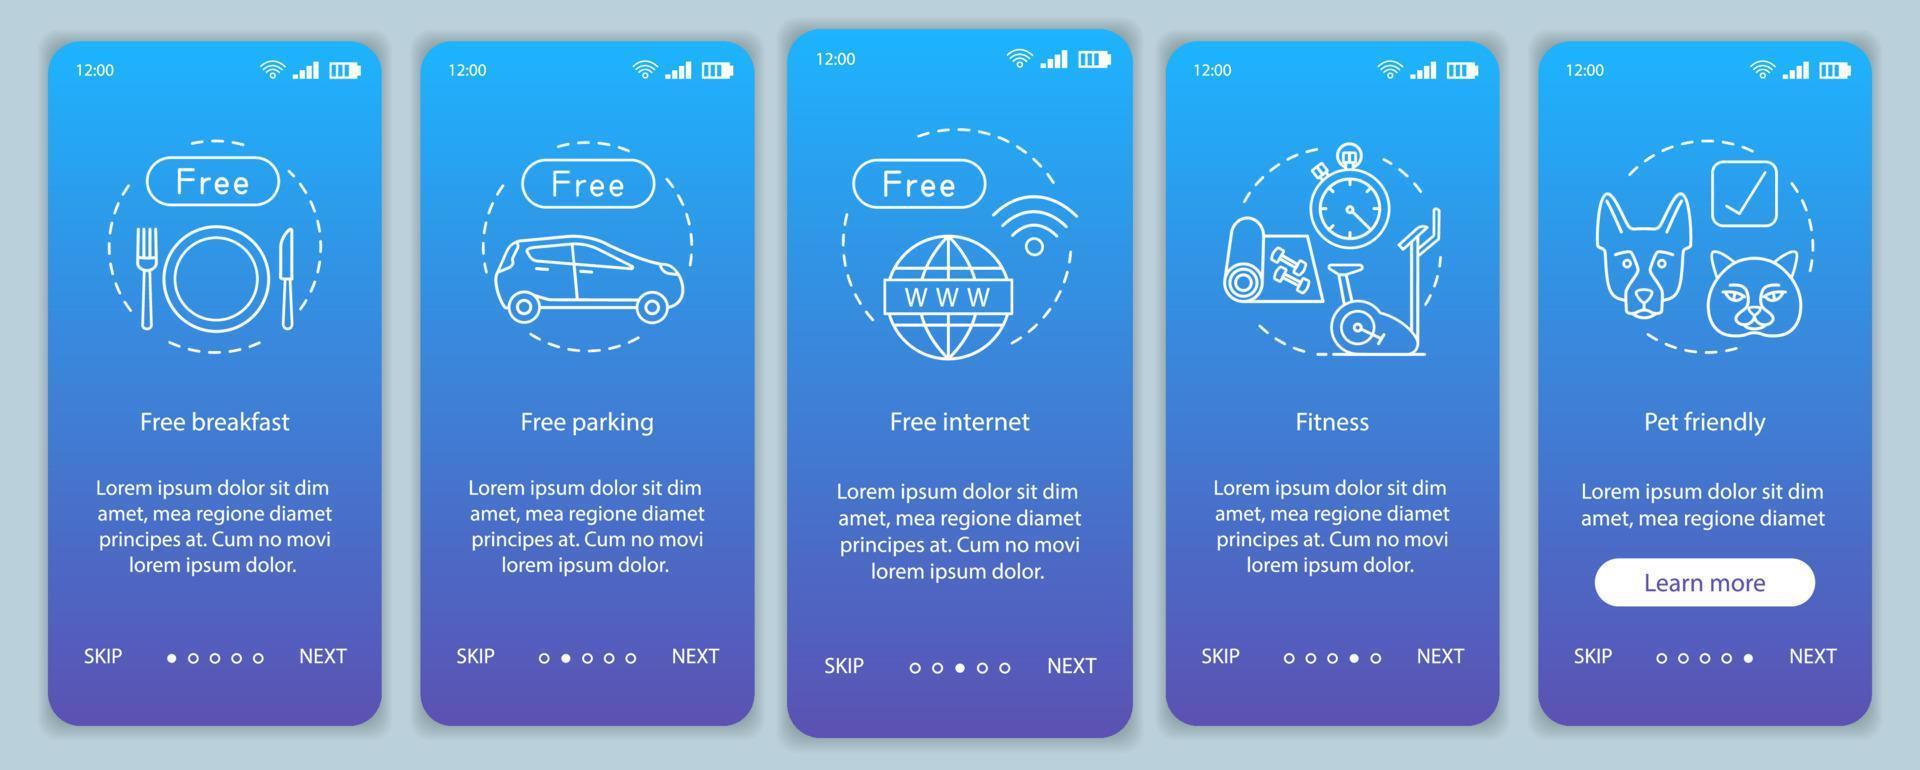 Hotel amenities onboarding mobile app screen vector template. Room facilities and services walkthrough website steps. Free breakfast, parking, internet. All inclusive. UX, UI, GUI smartphone interface